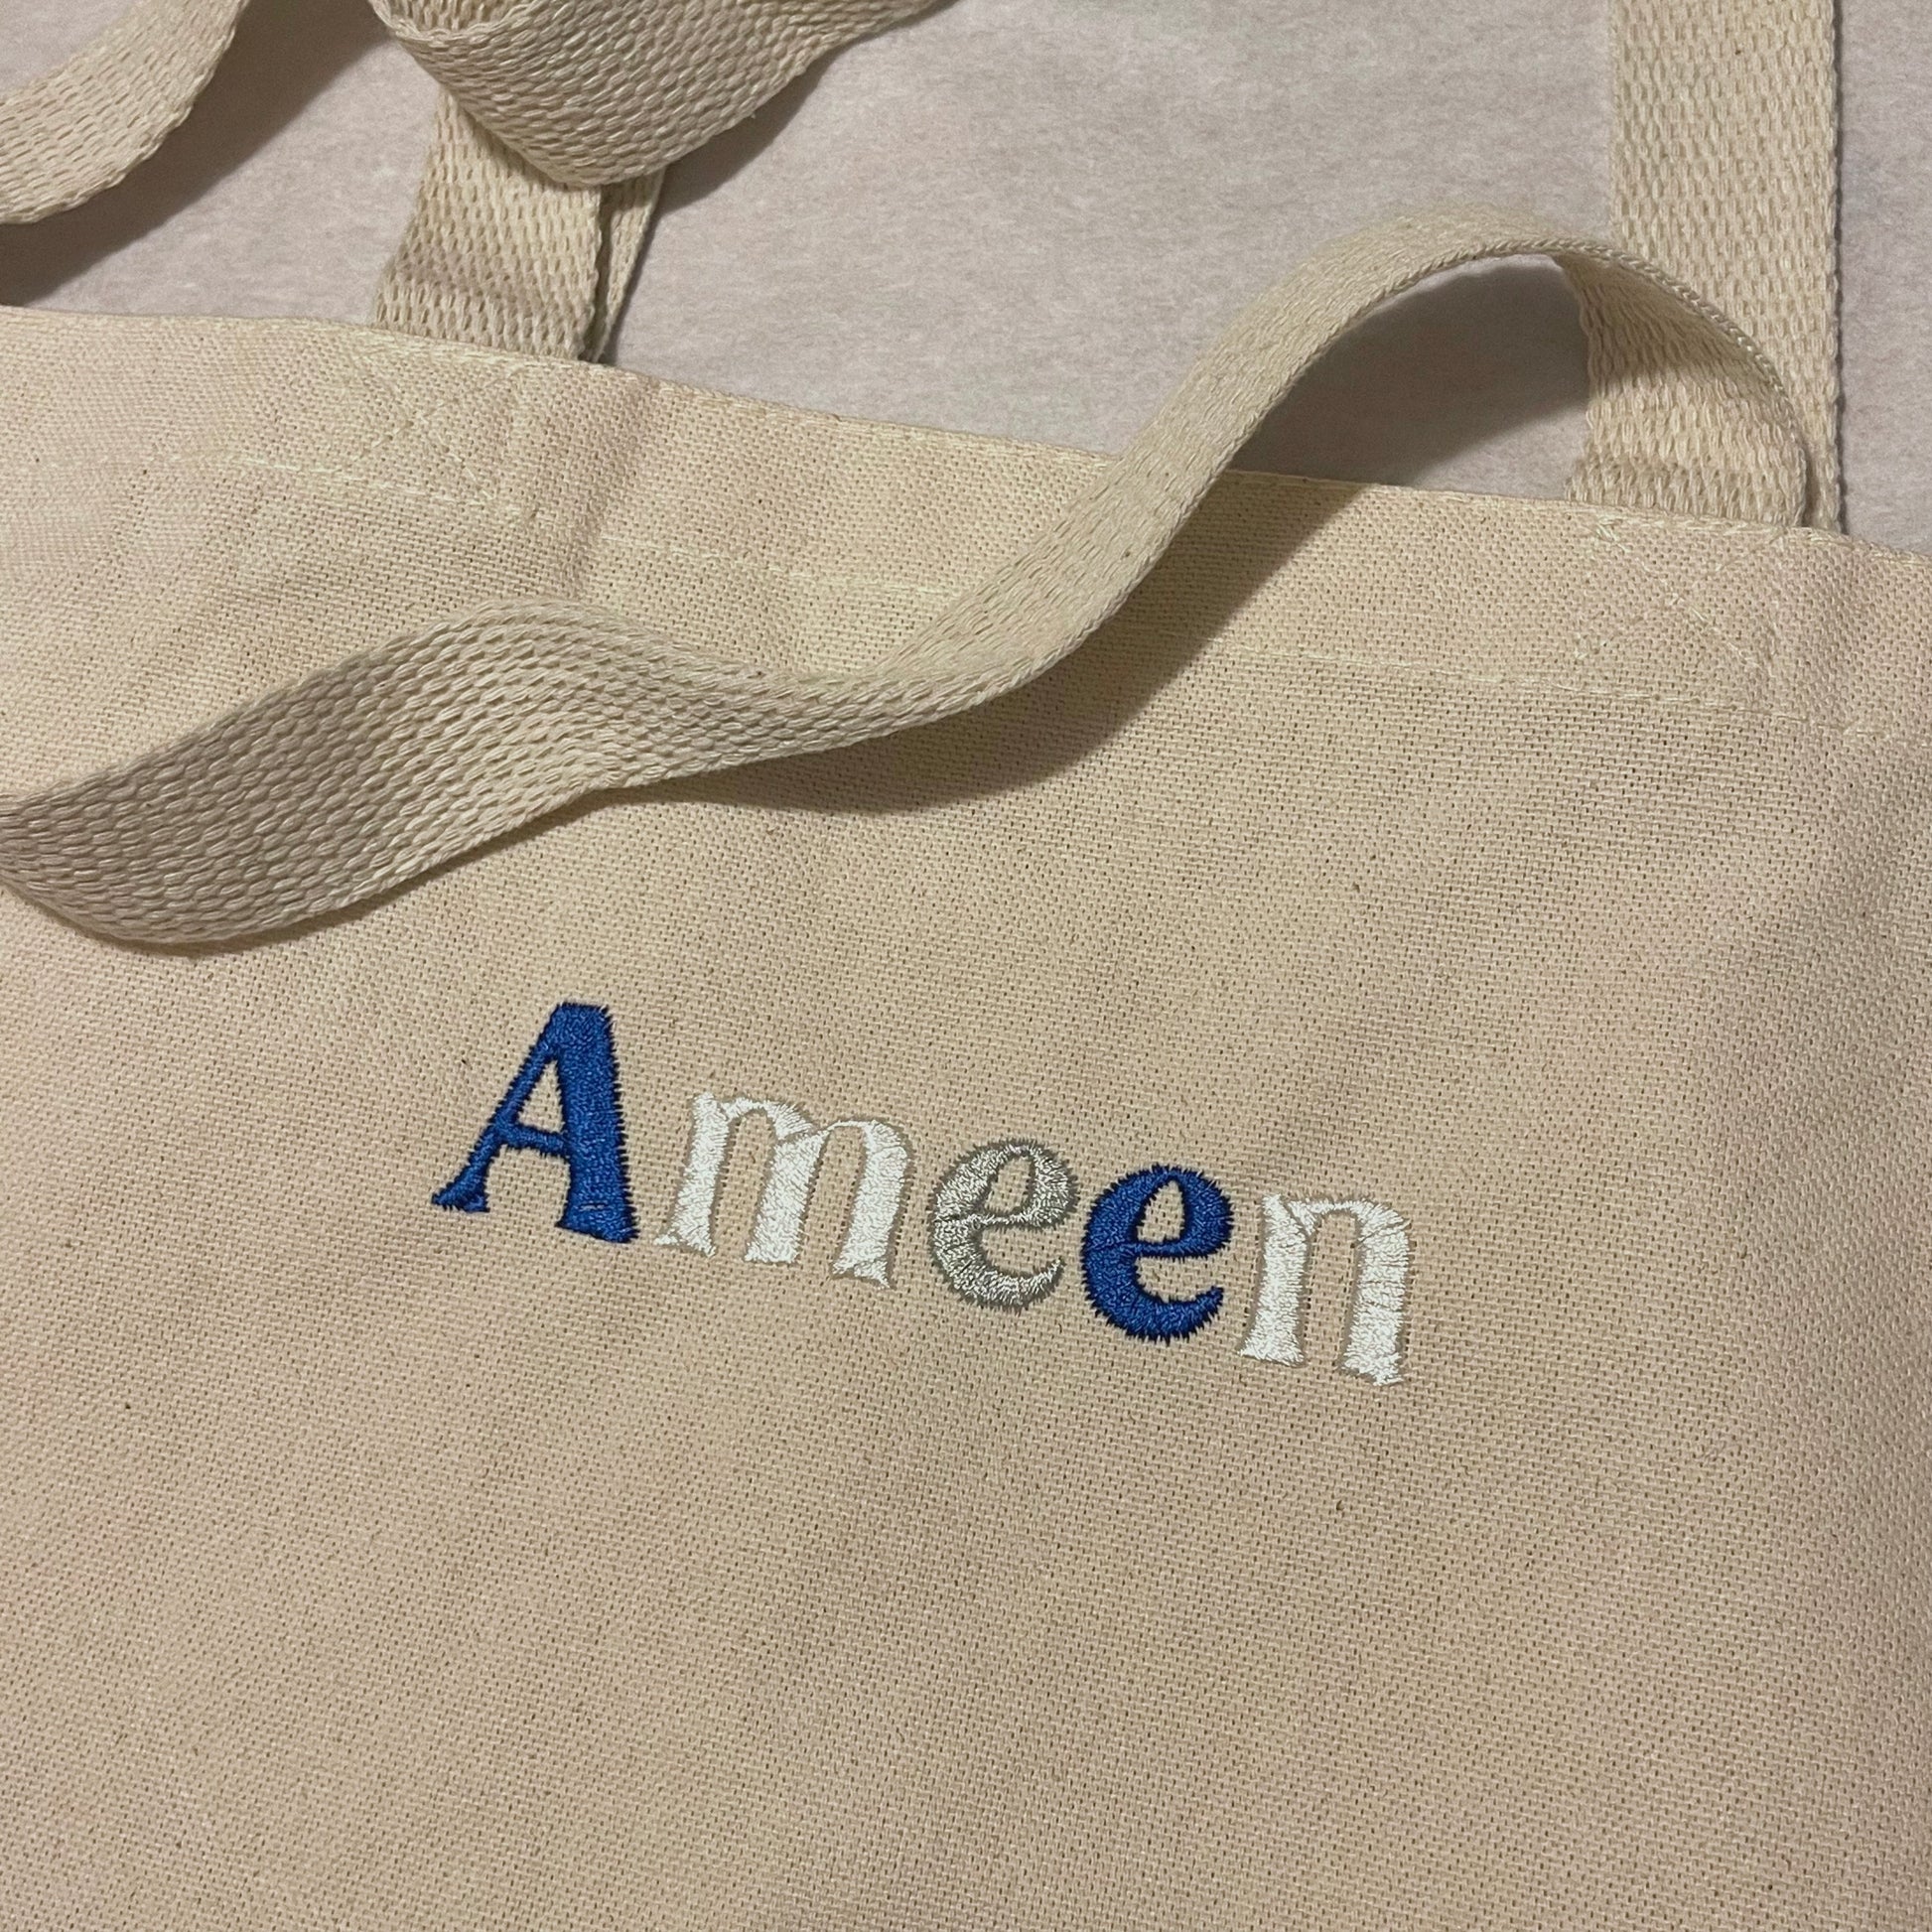 Custom Name and Title] Personalized Tote Bag